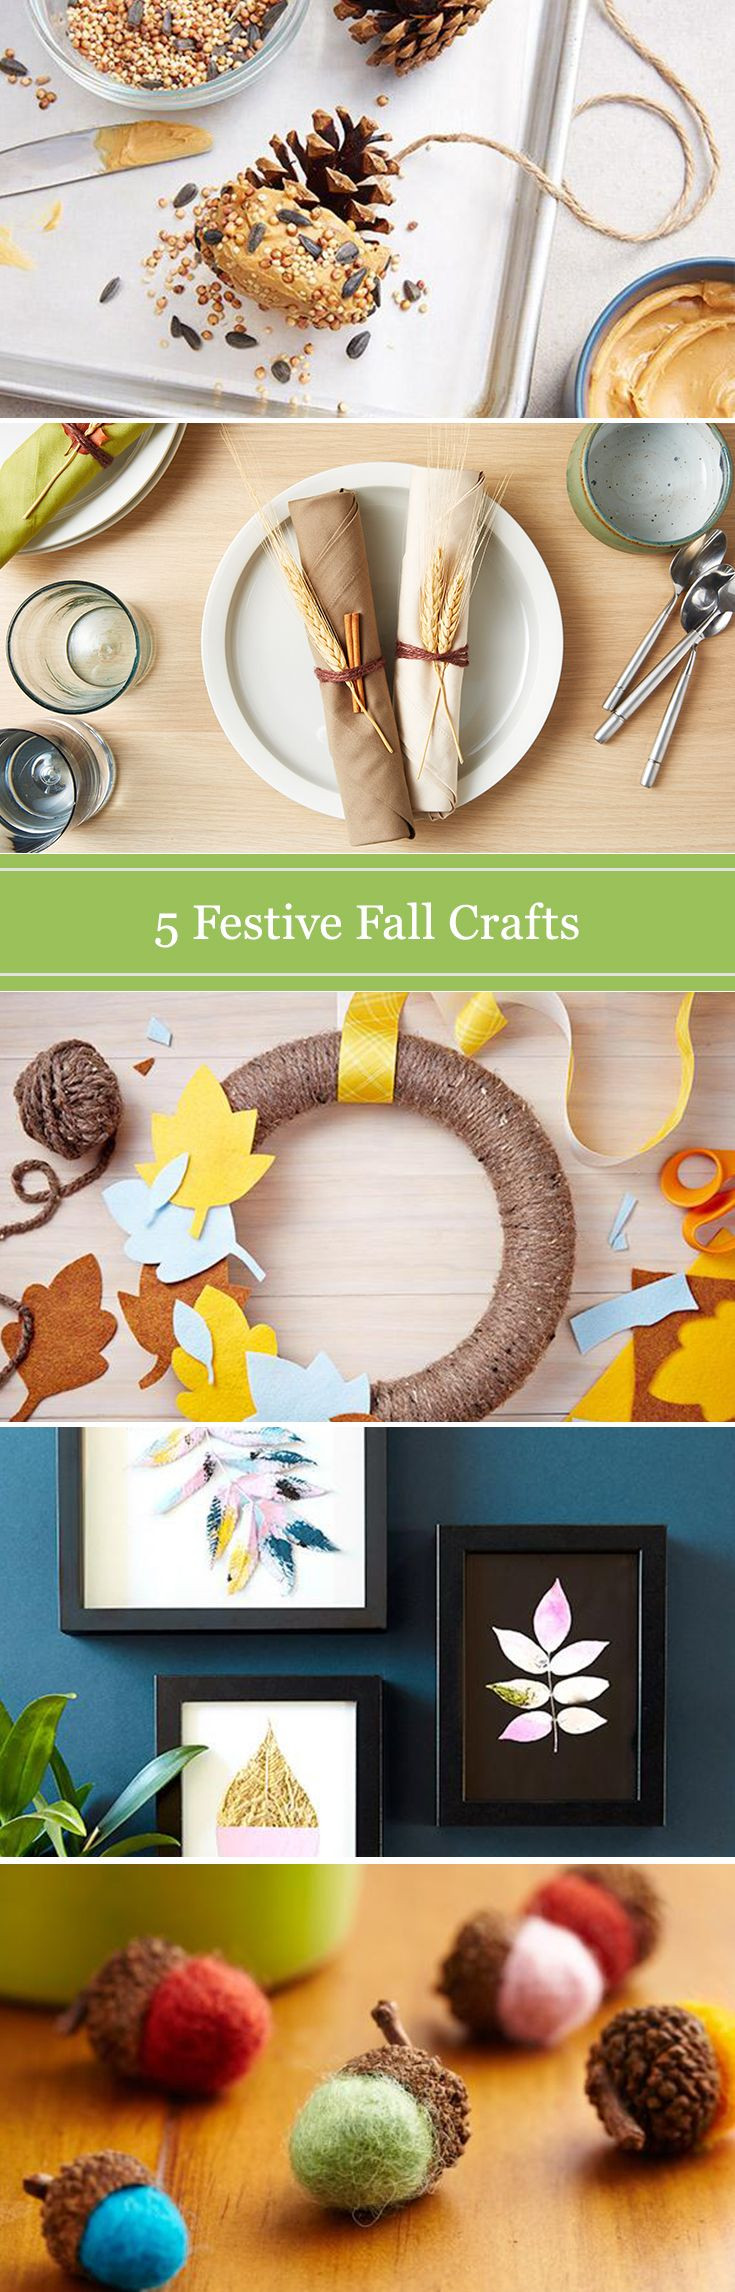 Simple Craft For Adults
 51 best Craft Ideas for Adults images on Pinterest